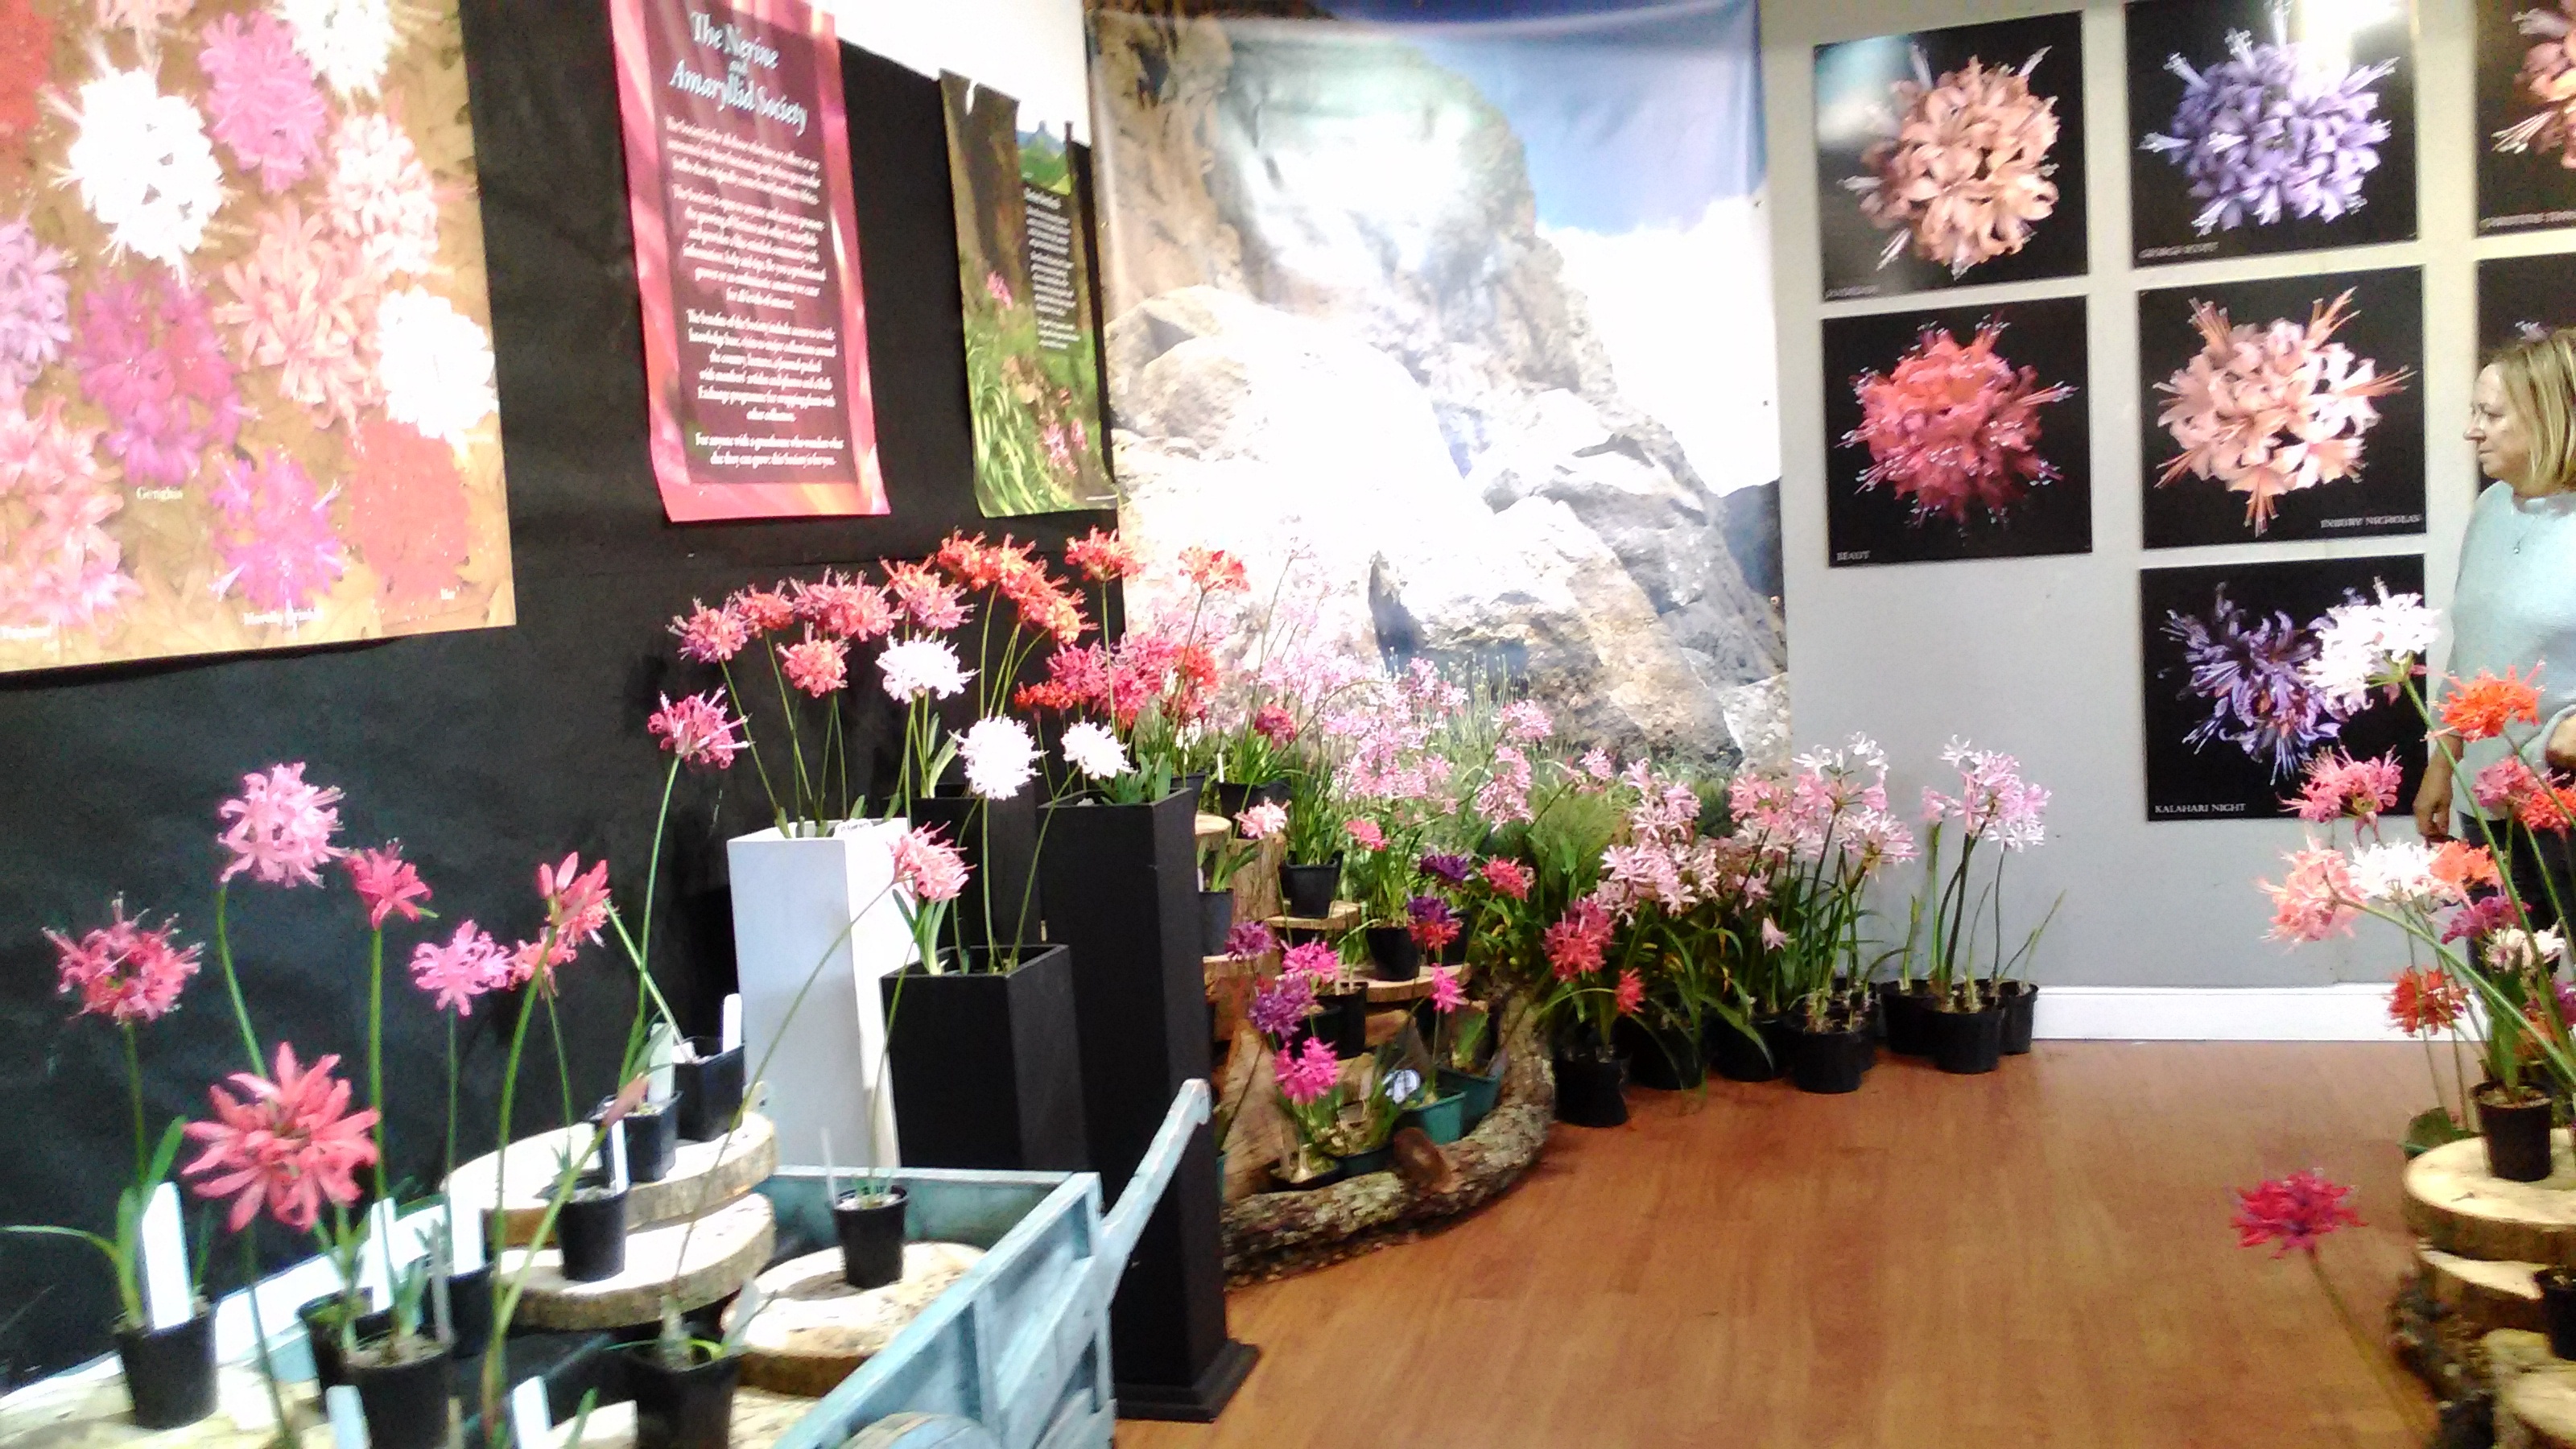 N. sarniensis and hardy nerines displayed in front of posters  and superb photos.